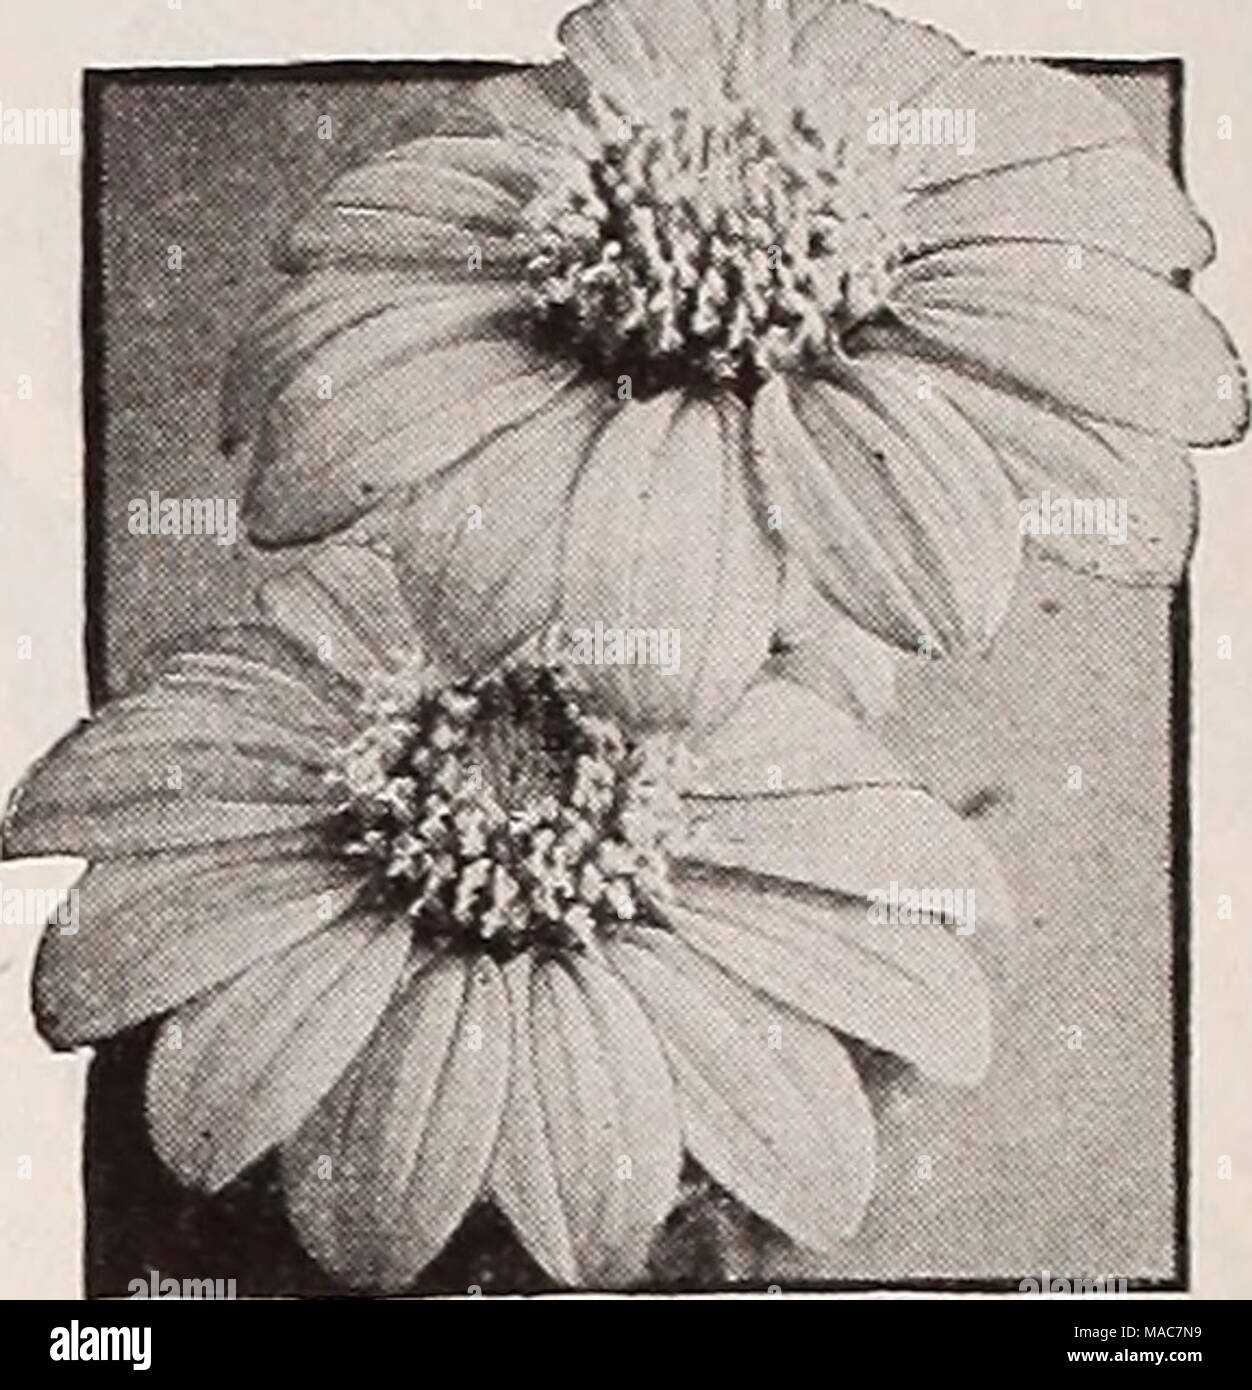 . Dreer's novelties and specialties for 1937 . Tithonia speciosa, Early-Flowering Tithonia speciosa ® Mexican Sunflower Golden Flower of the lncas 4313 Early-Flowering One of the most brilliant of all fall flowers with gorgeous glistening orange- vermilion blooms borne profusely on plants 5 to 6 feet in height. It blooms 10 days earlier than the type which makes it partic- ularly valuable in sections where the season is only moderately long. Its height makes it valuable for background planting but its greatest value is as a cut flower which lasts a long time in water. Pkt. 20c; special pkt. 60 Stock Photo